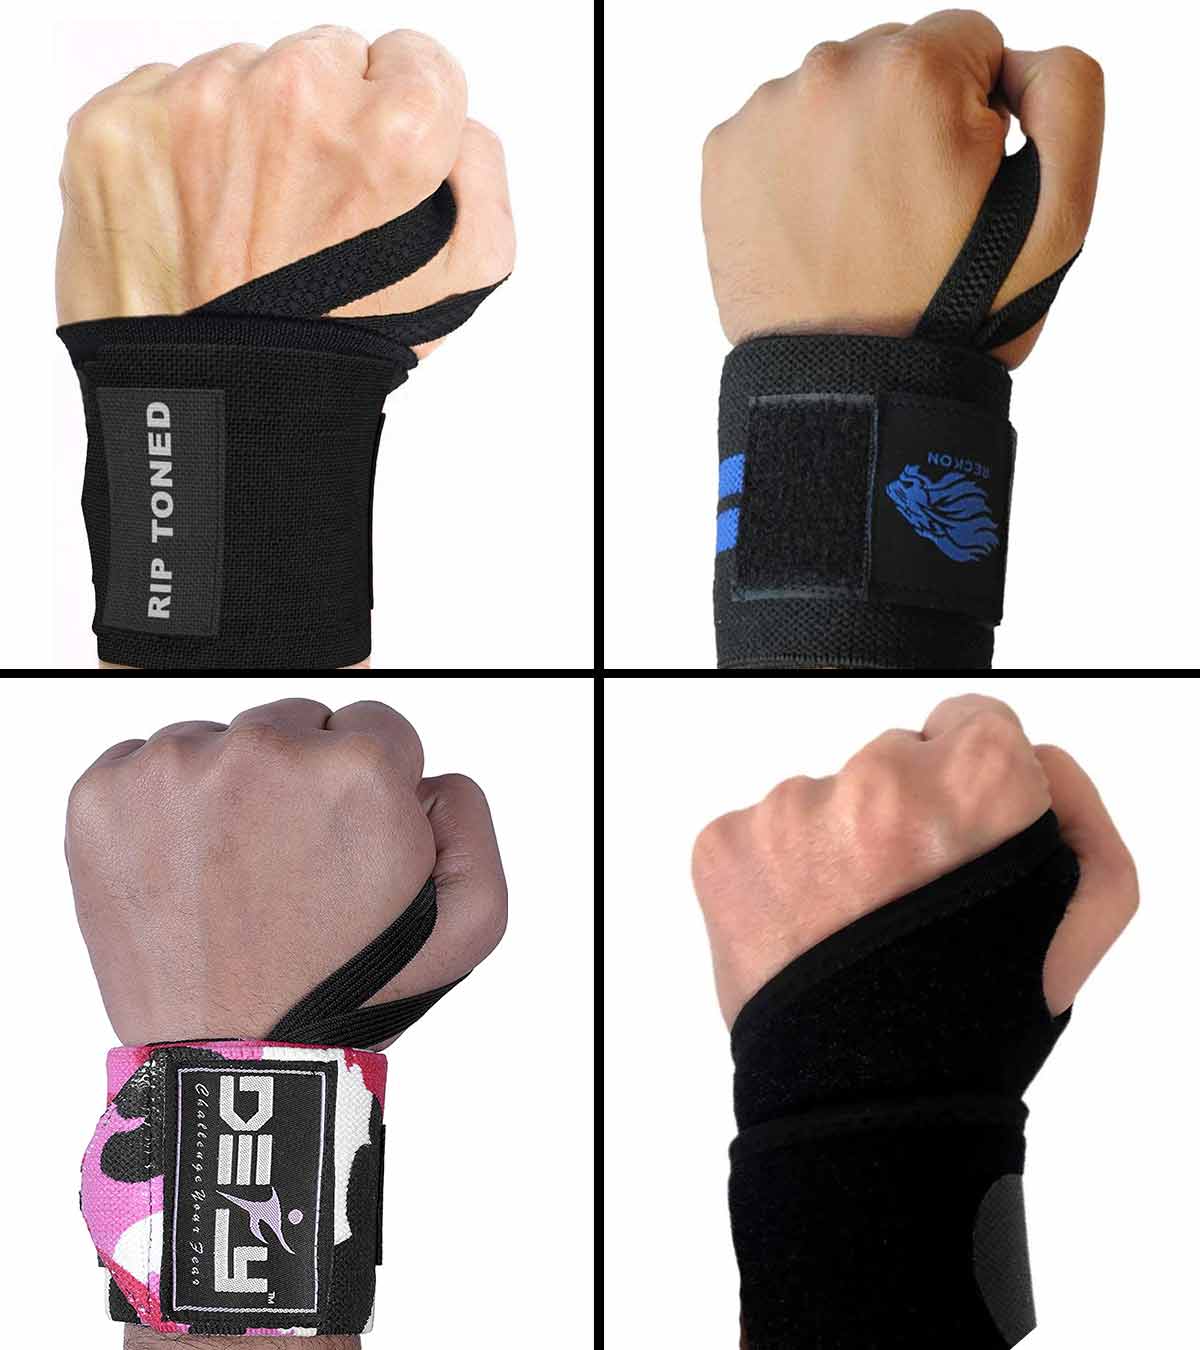 Wrist Wraps by Rip Toned Weight Lifting Strength Training Powerlifting Crossfit Wrist Support Braces for Men & Women 18 Professional Grade with Thumb Loops 